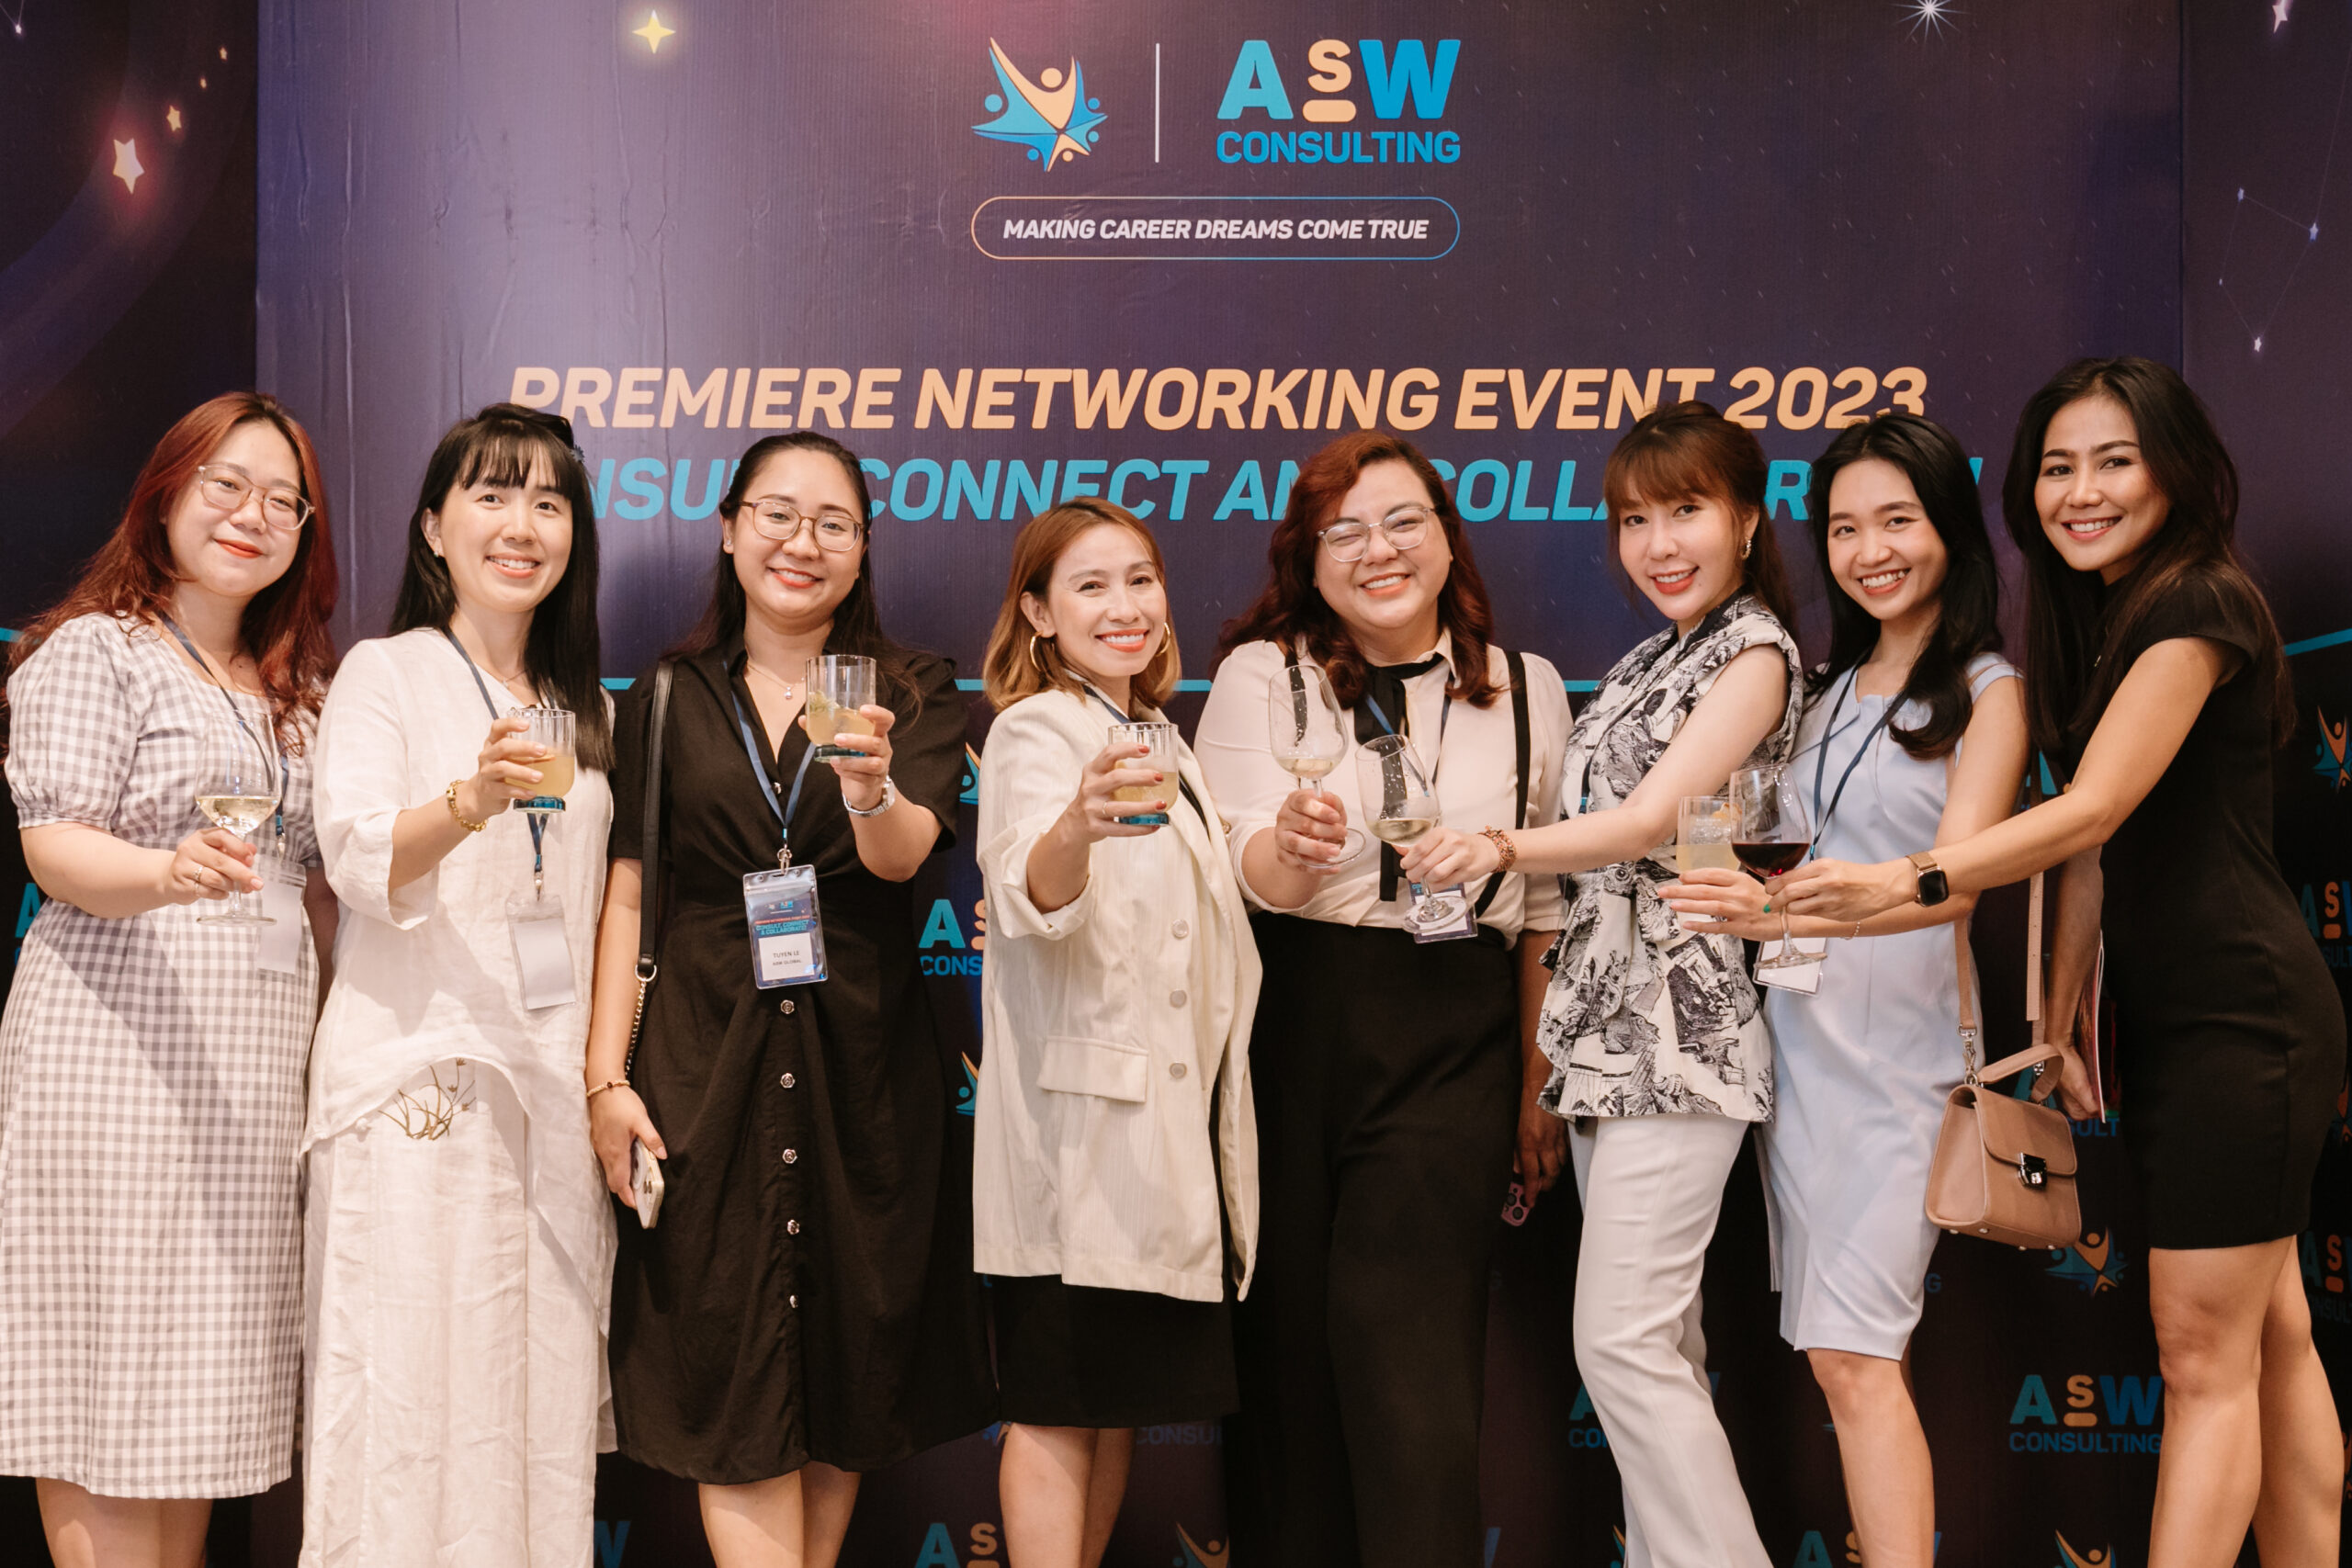 ASW Consulting’s Premiere Networking Event 10